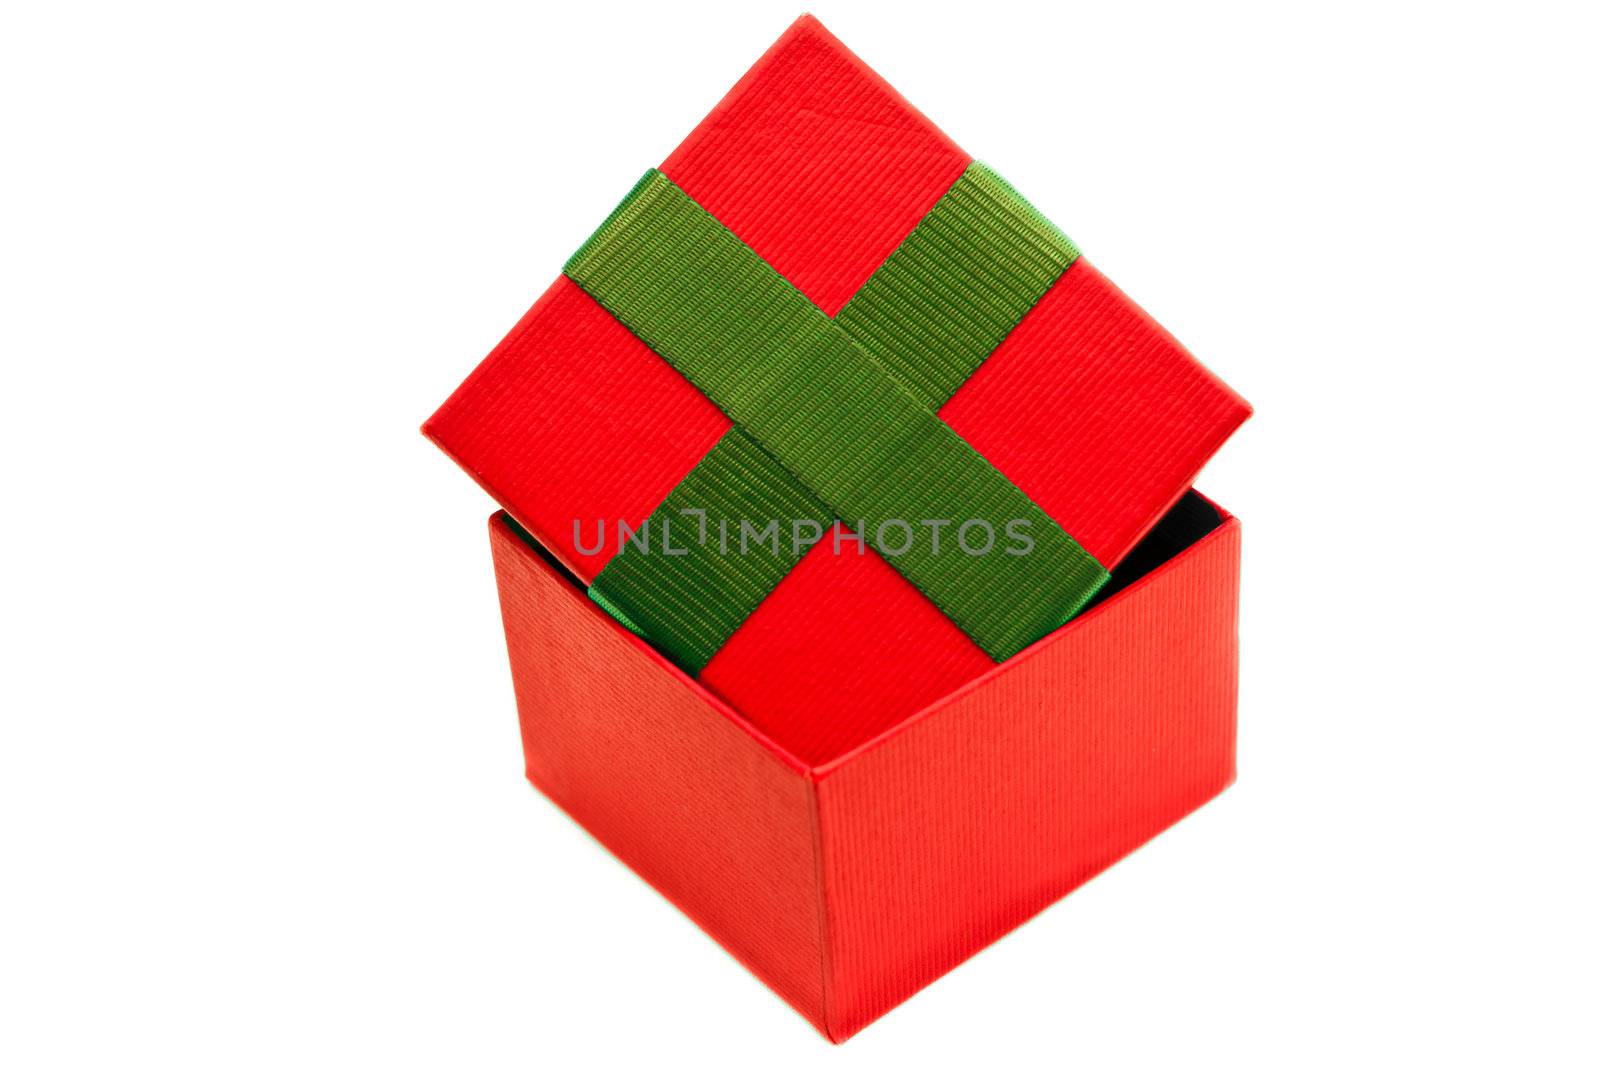 Isolated red green present box by oguzdkn